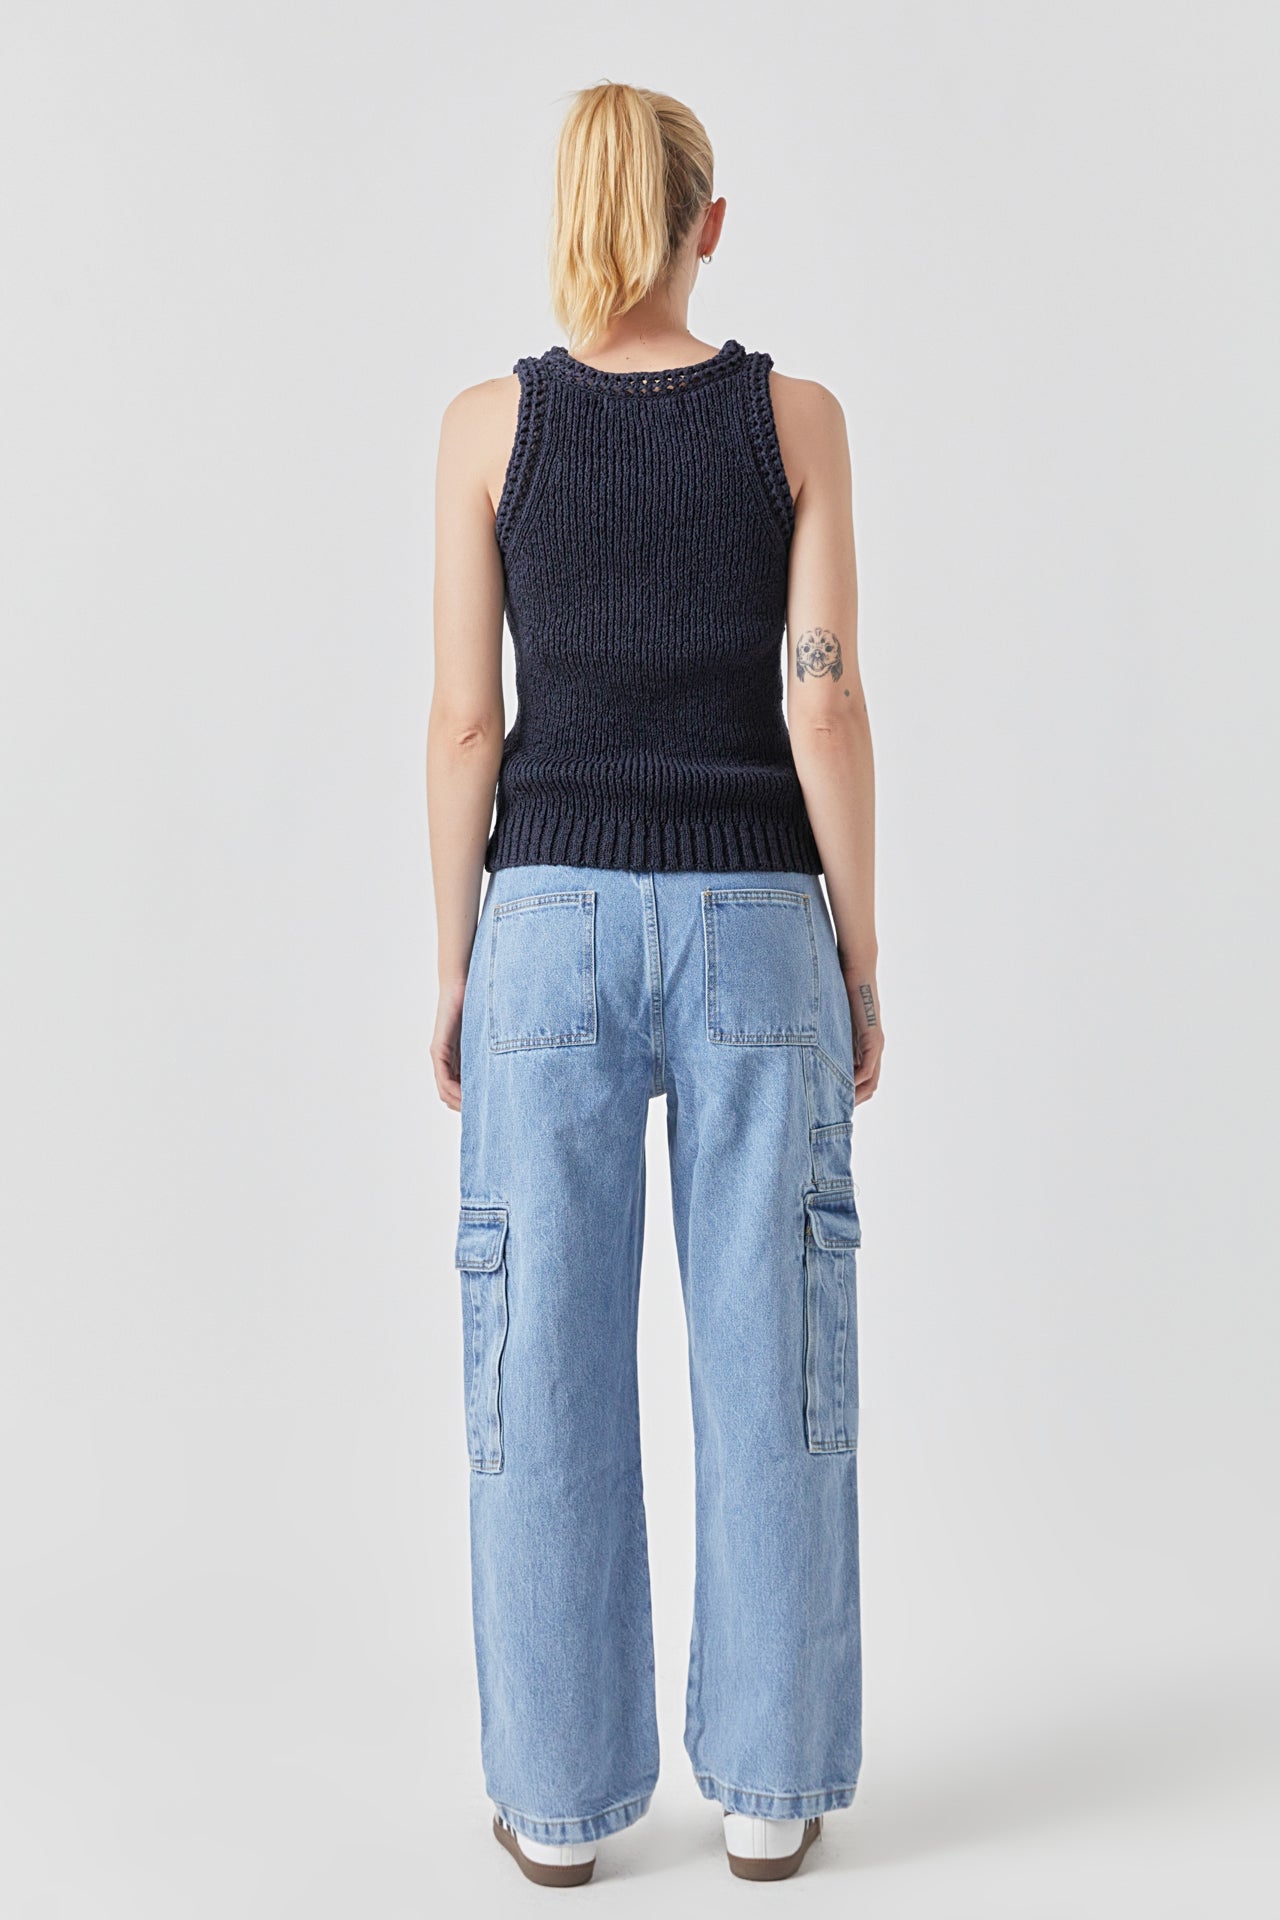 GREY LAB - Round Neck Sleeveless Knit Top - TOPS available at Objectrare